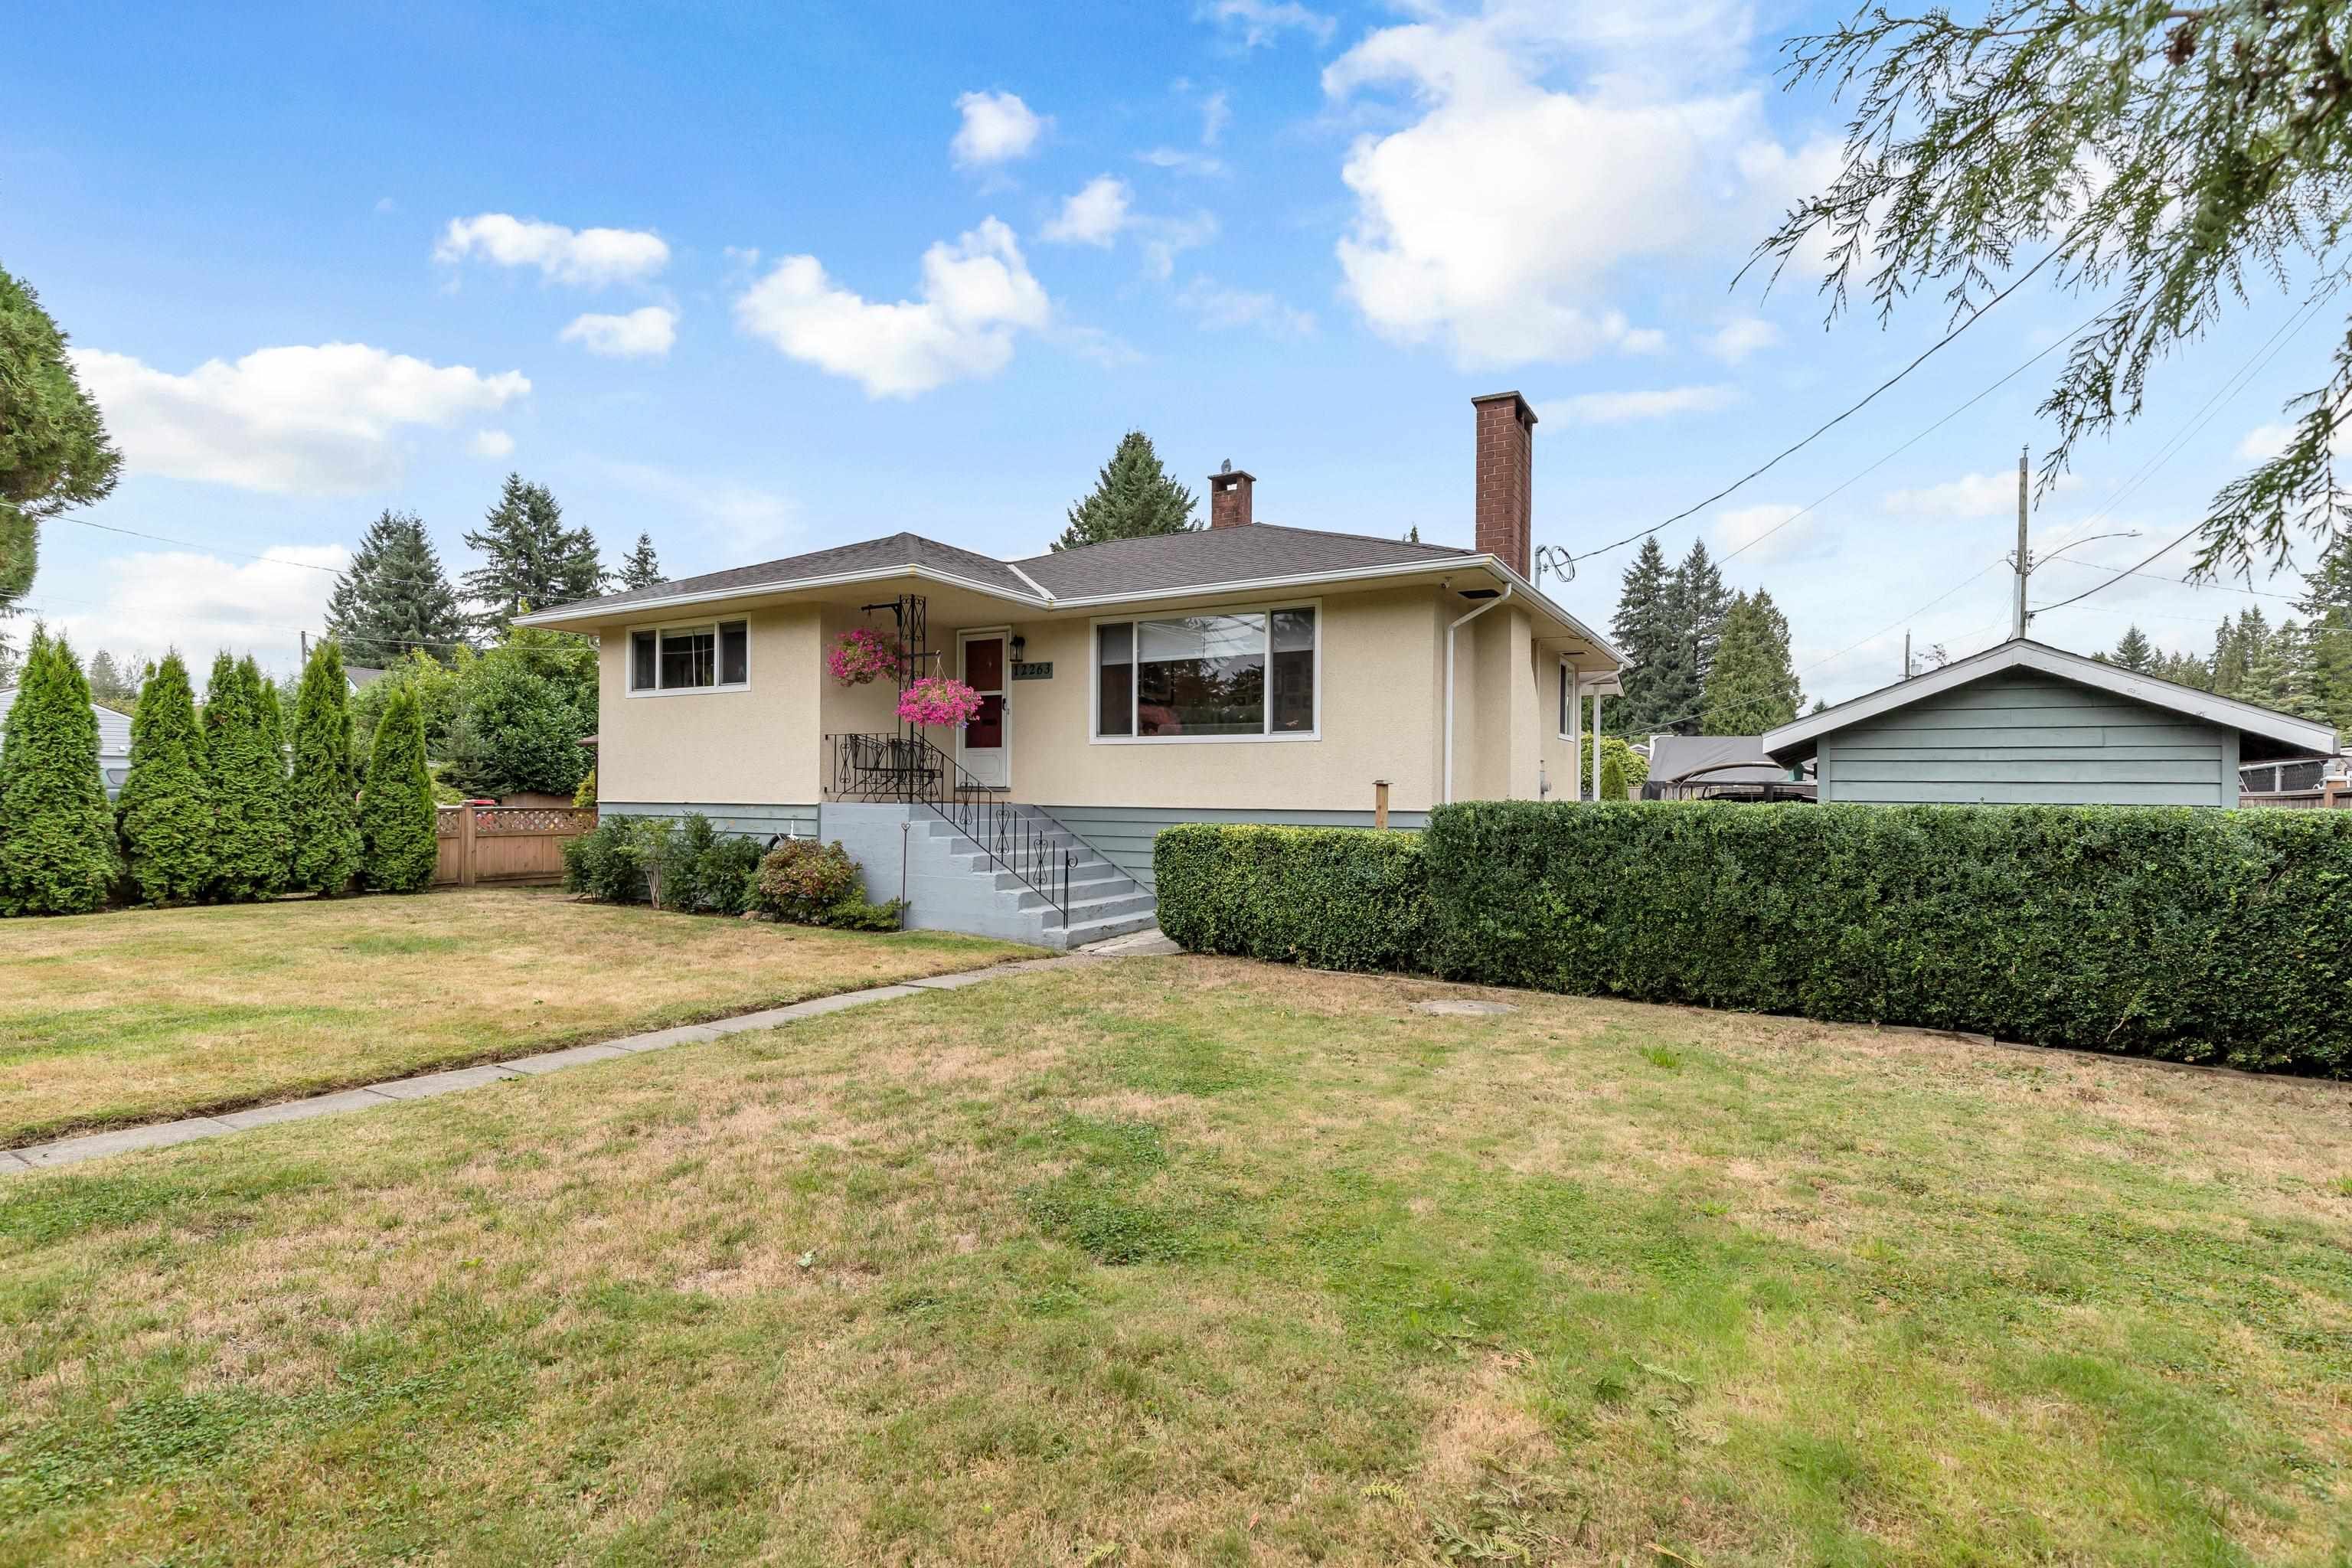 I have sold a property at 12263 216 ST in Maple Ridge
